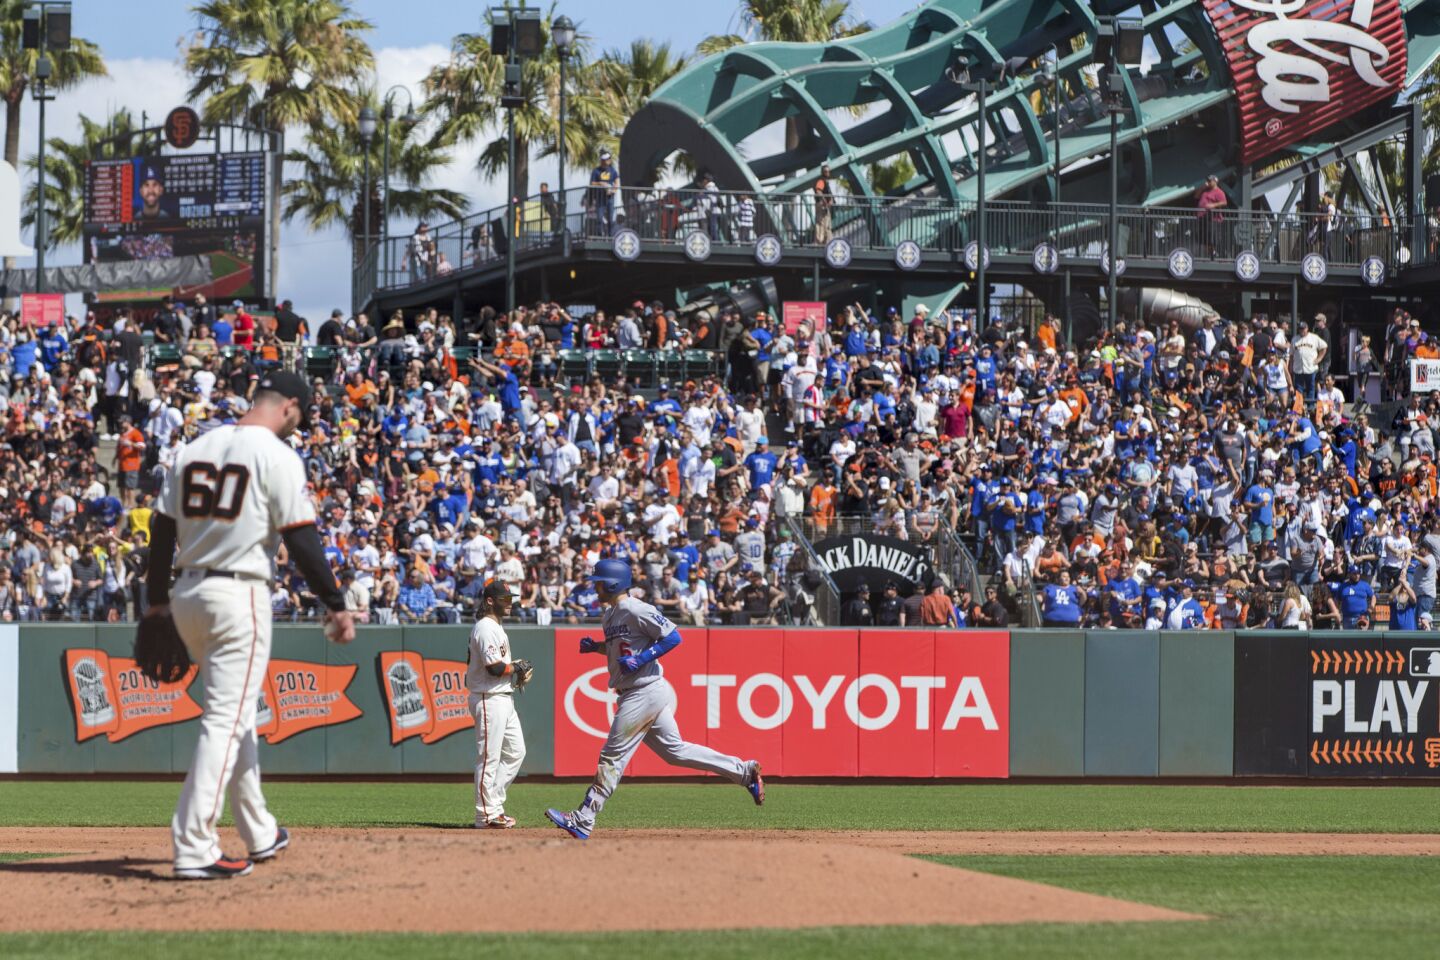 Los Angeles Dodgers Brian Dozier runs the bases after hitting a two-run homer against the San Francisco Giants in the third inning of a baseball game in San Francisco, Sunday, Sept. 30, 2018.